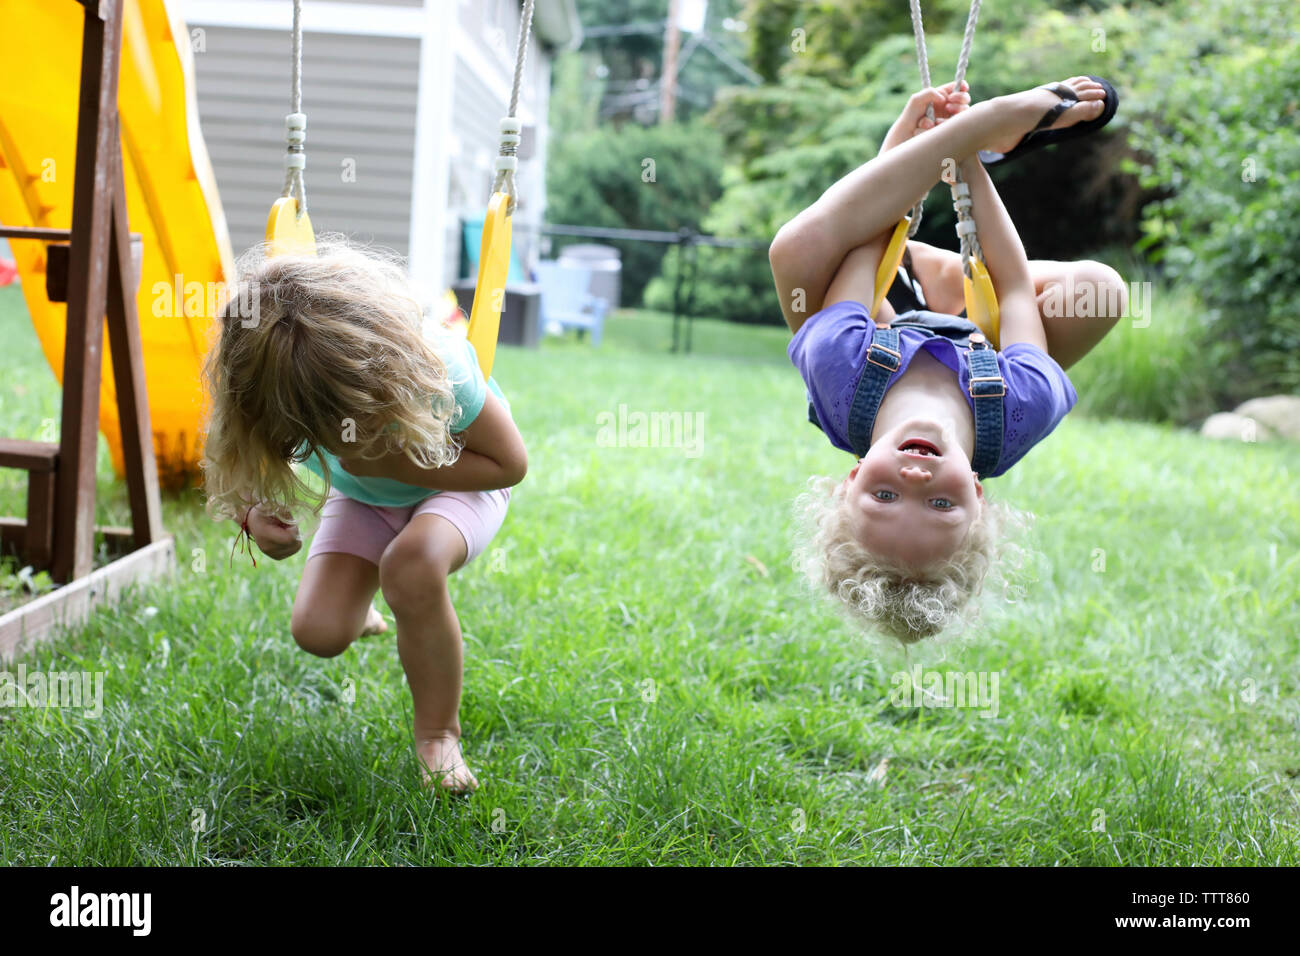 Playful sisters swinging over grassy field at playground Stock Photo